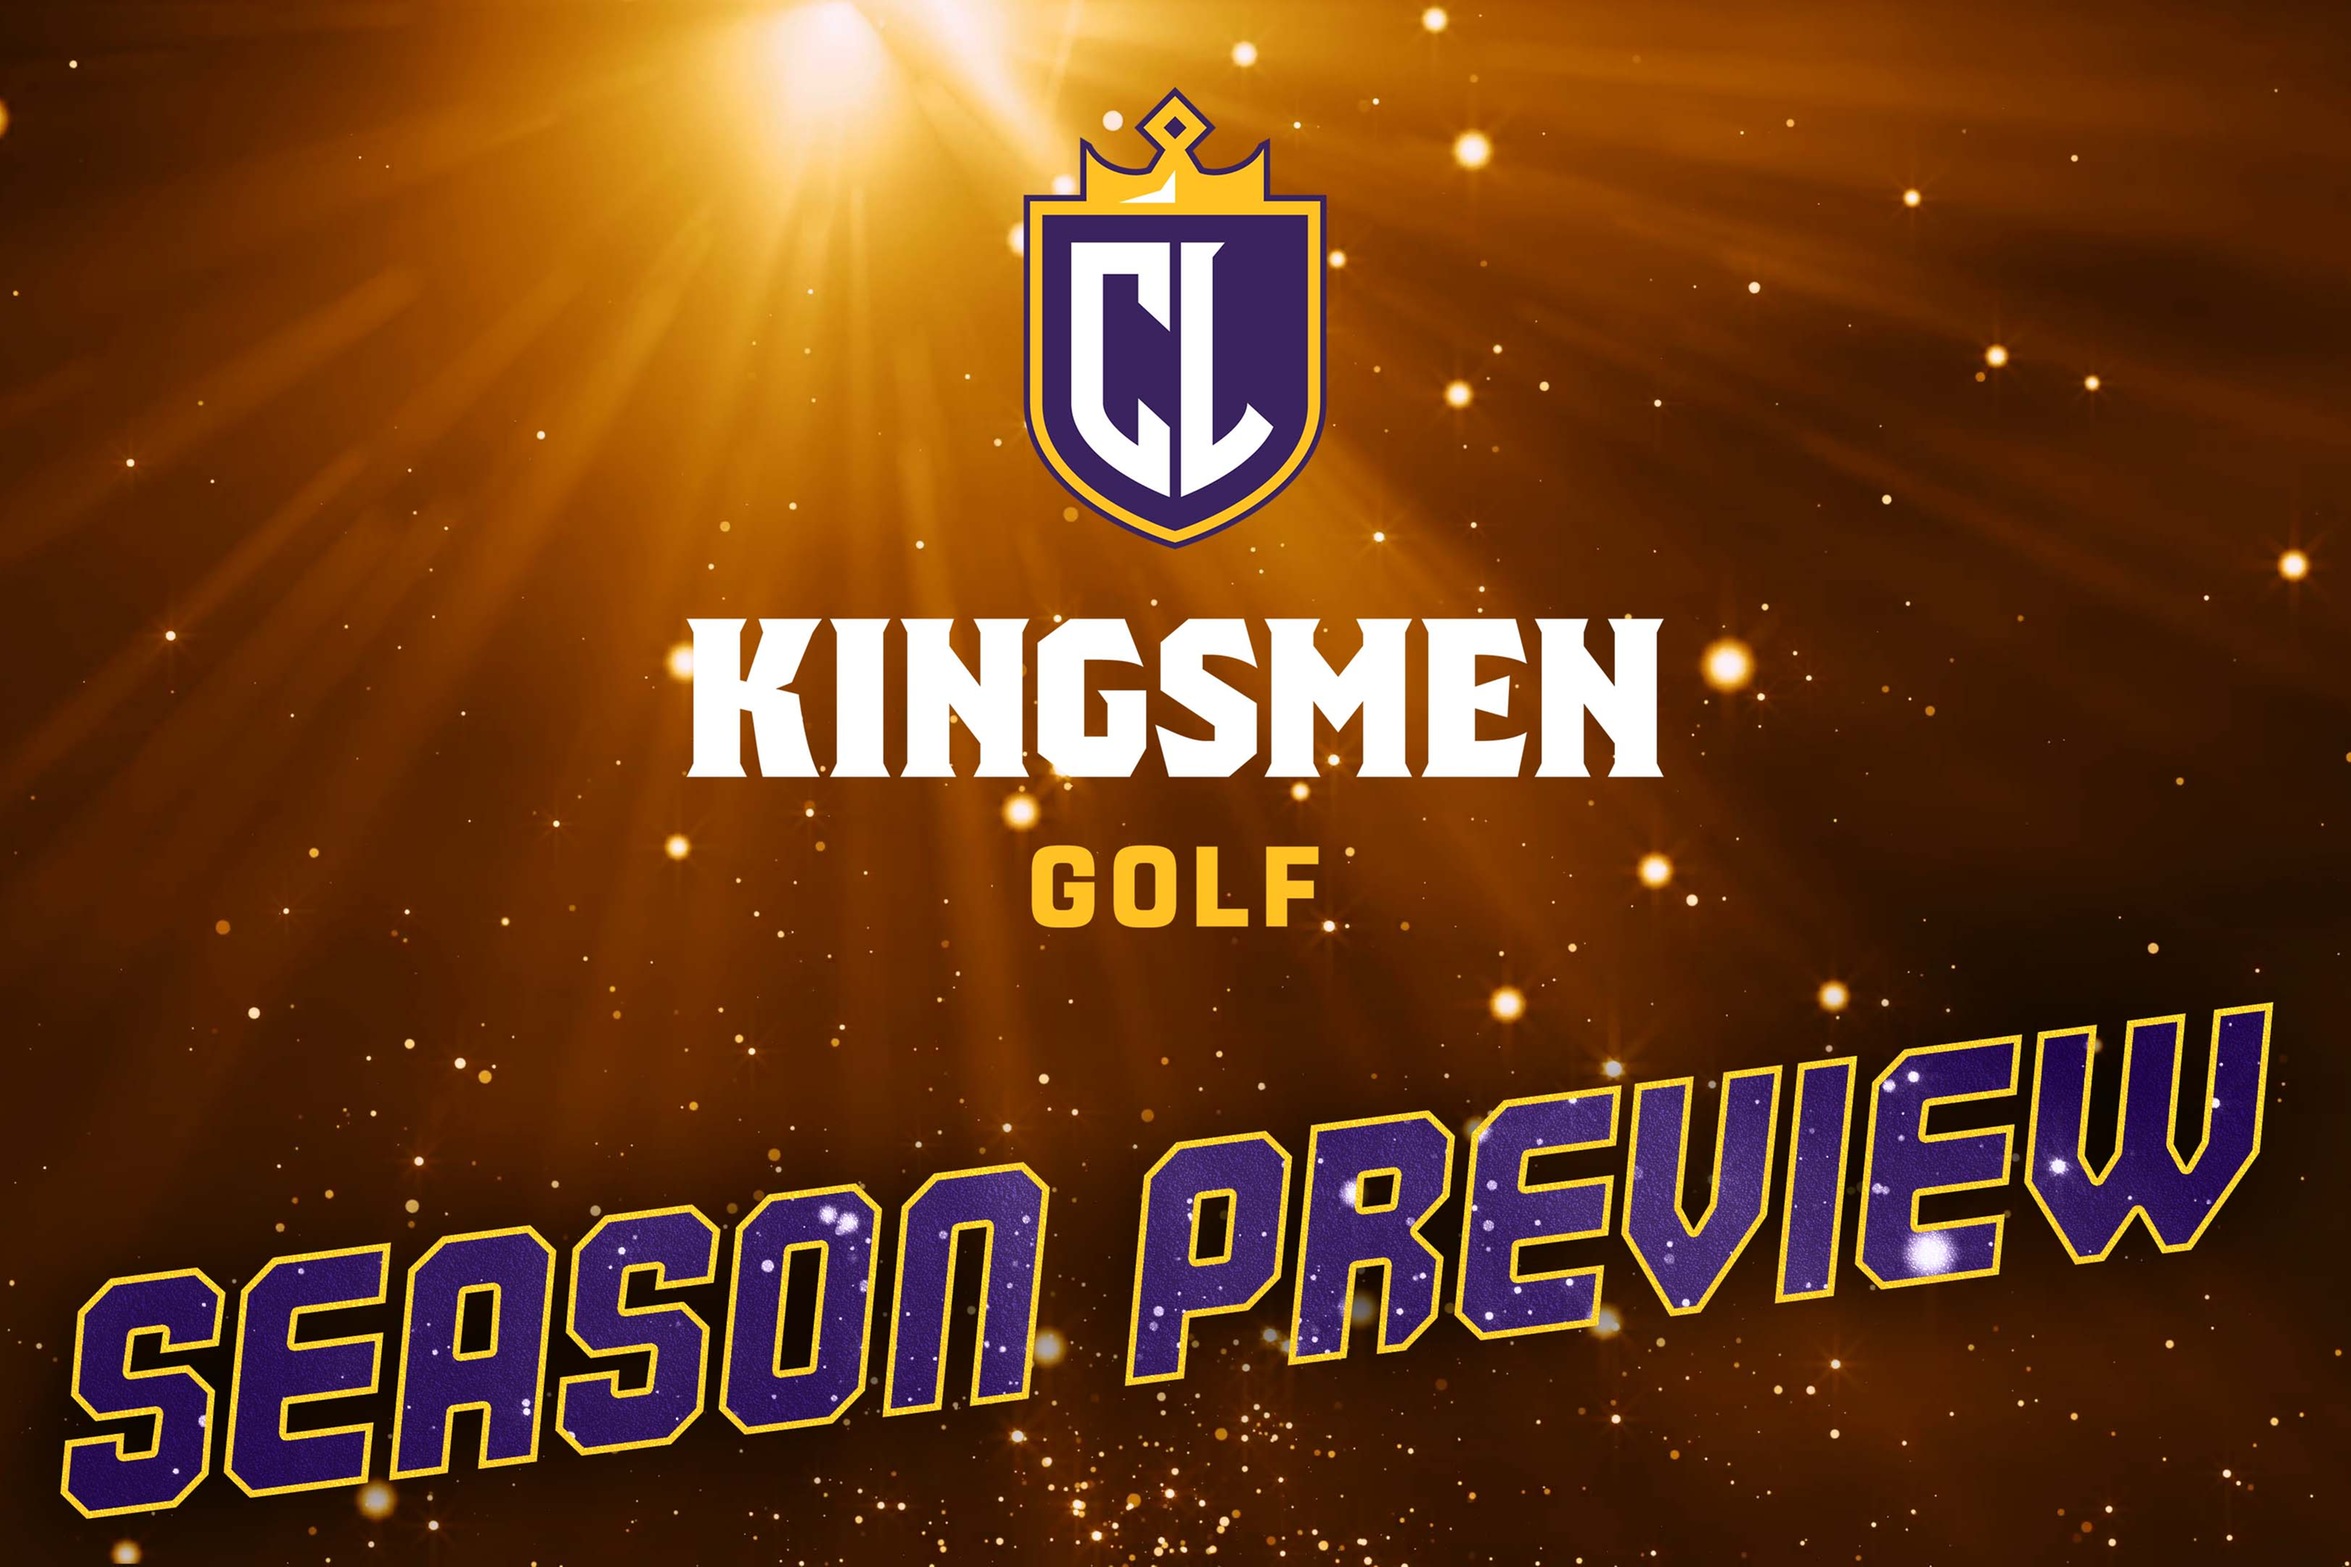 Kingsmen Ready for a Tee-riffic 2022